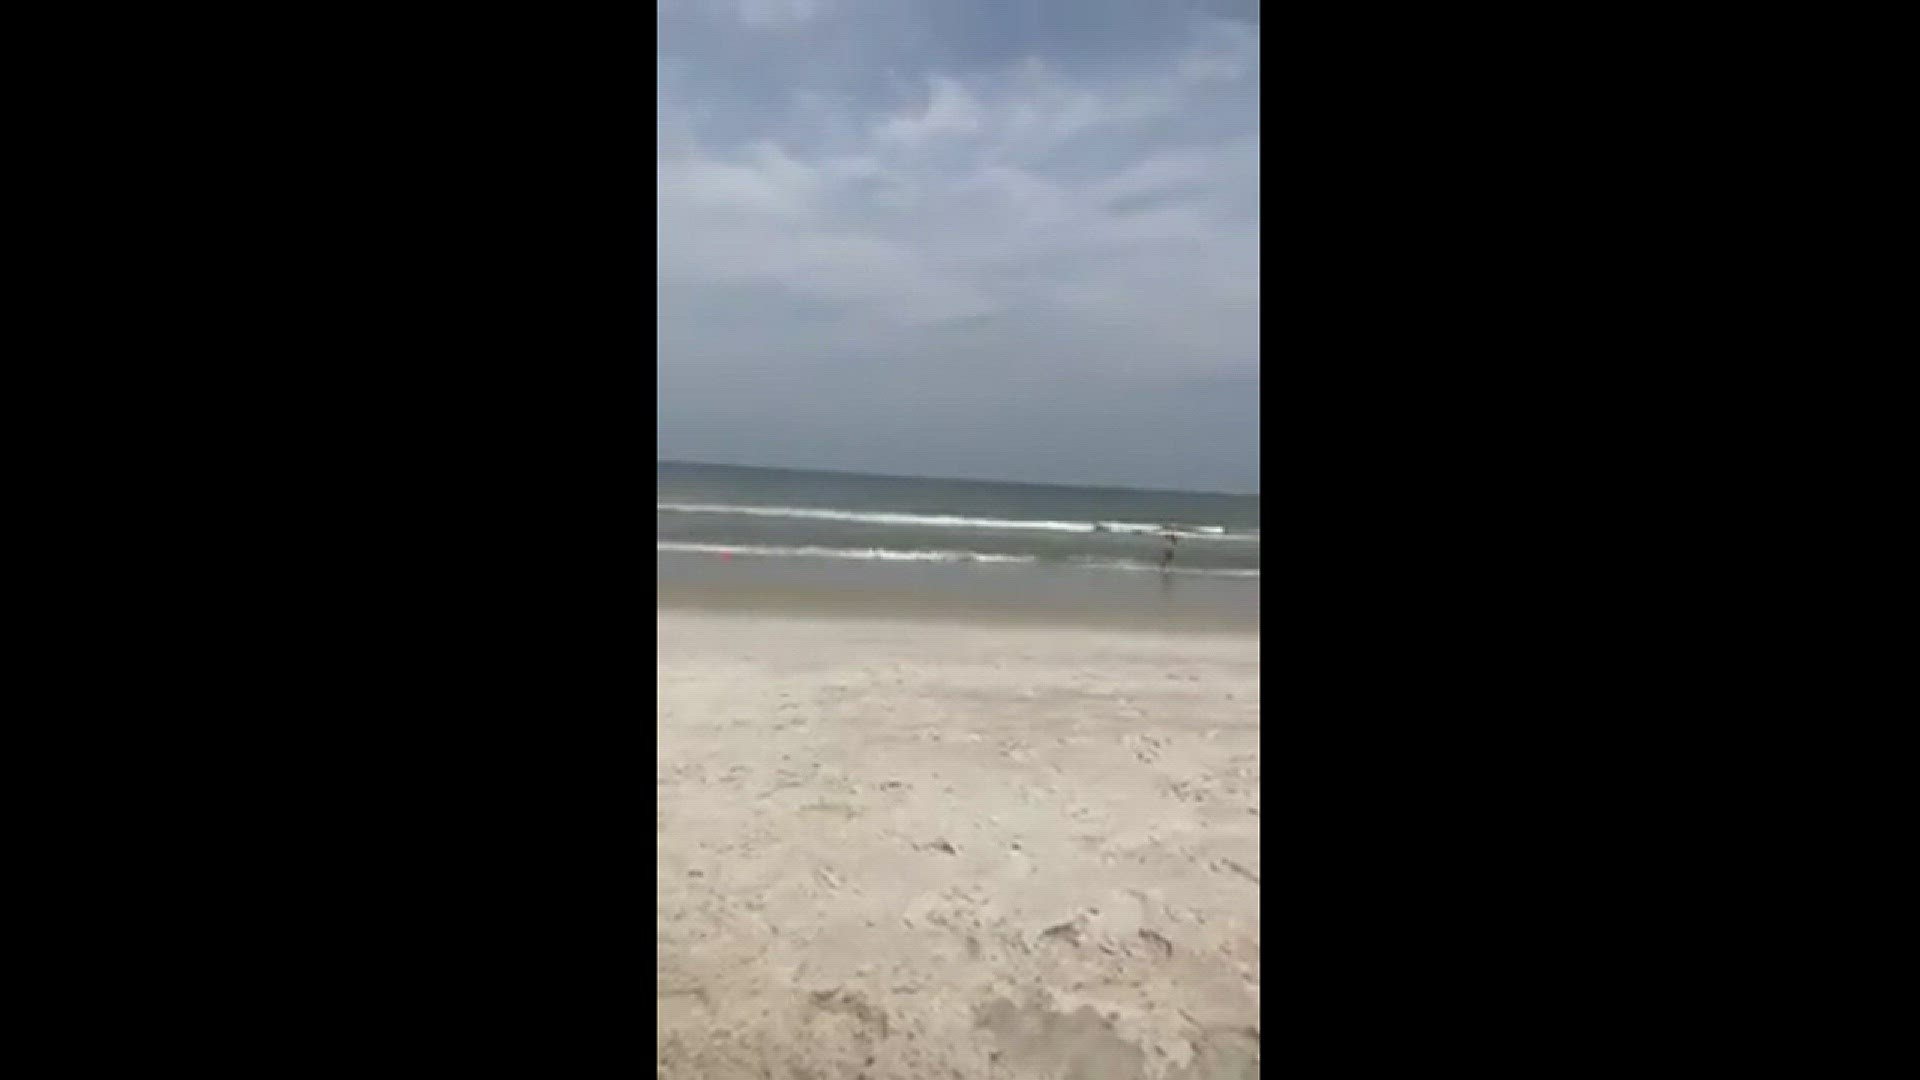 Two people, a 17-year-old boy and a 30-year-old man, were bitten by sharks in Fernandina Beach Friday afternoon. (Video courtesy of ?Danielle Miller)